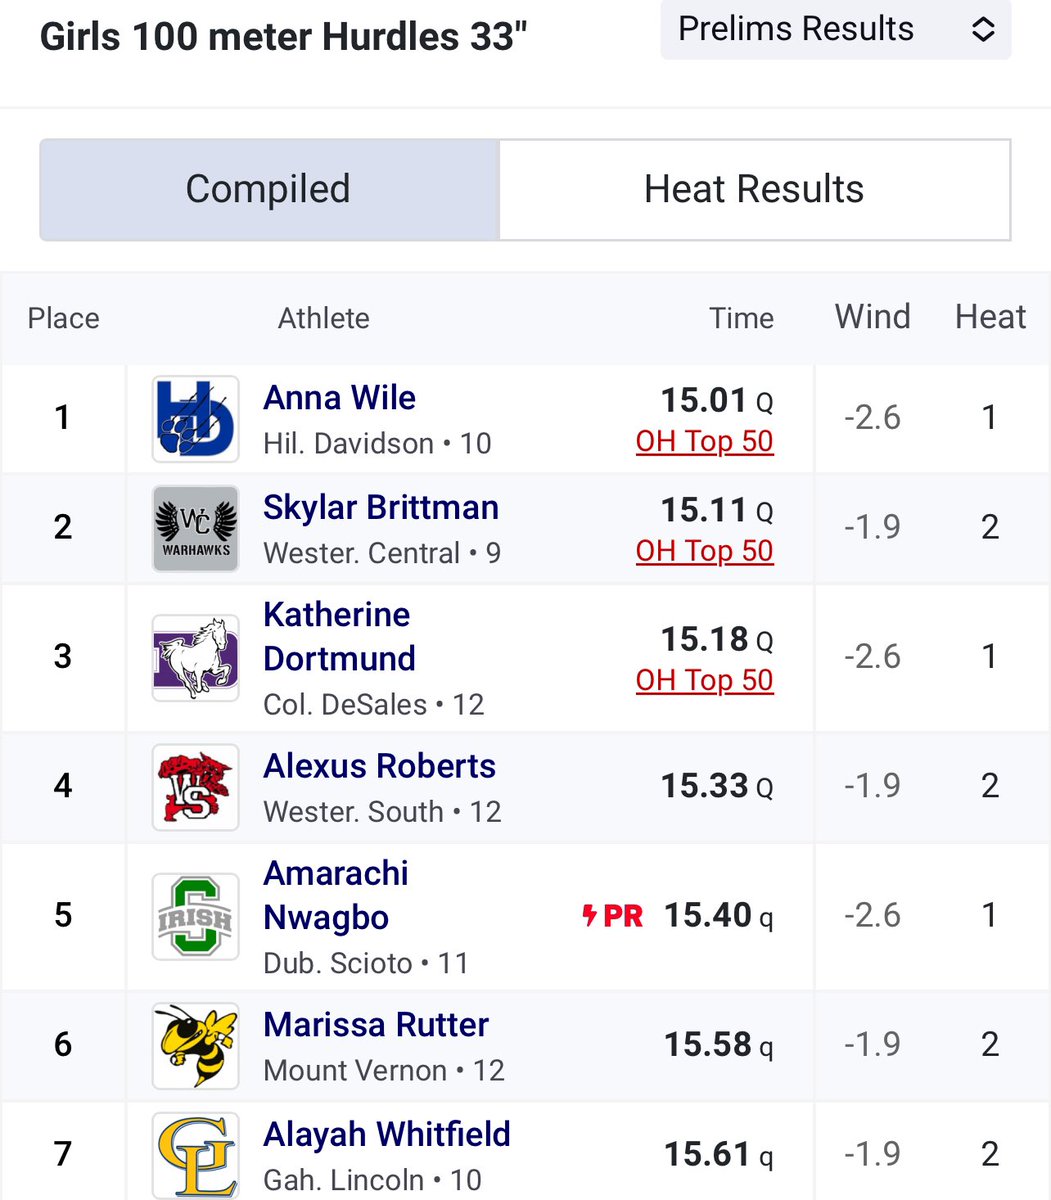 Sophomore Alayah Whitfield has qualified for the Regional Finals in the 100m Hurdles! @CoachJManley @GLHS_Athletics #WeAreLions🦁💙💛